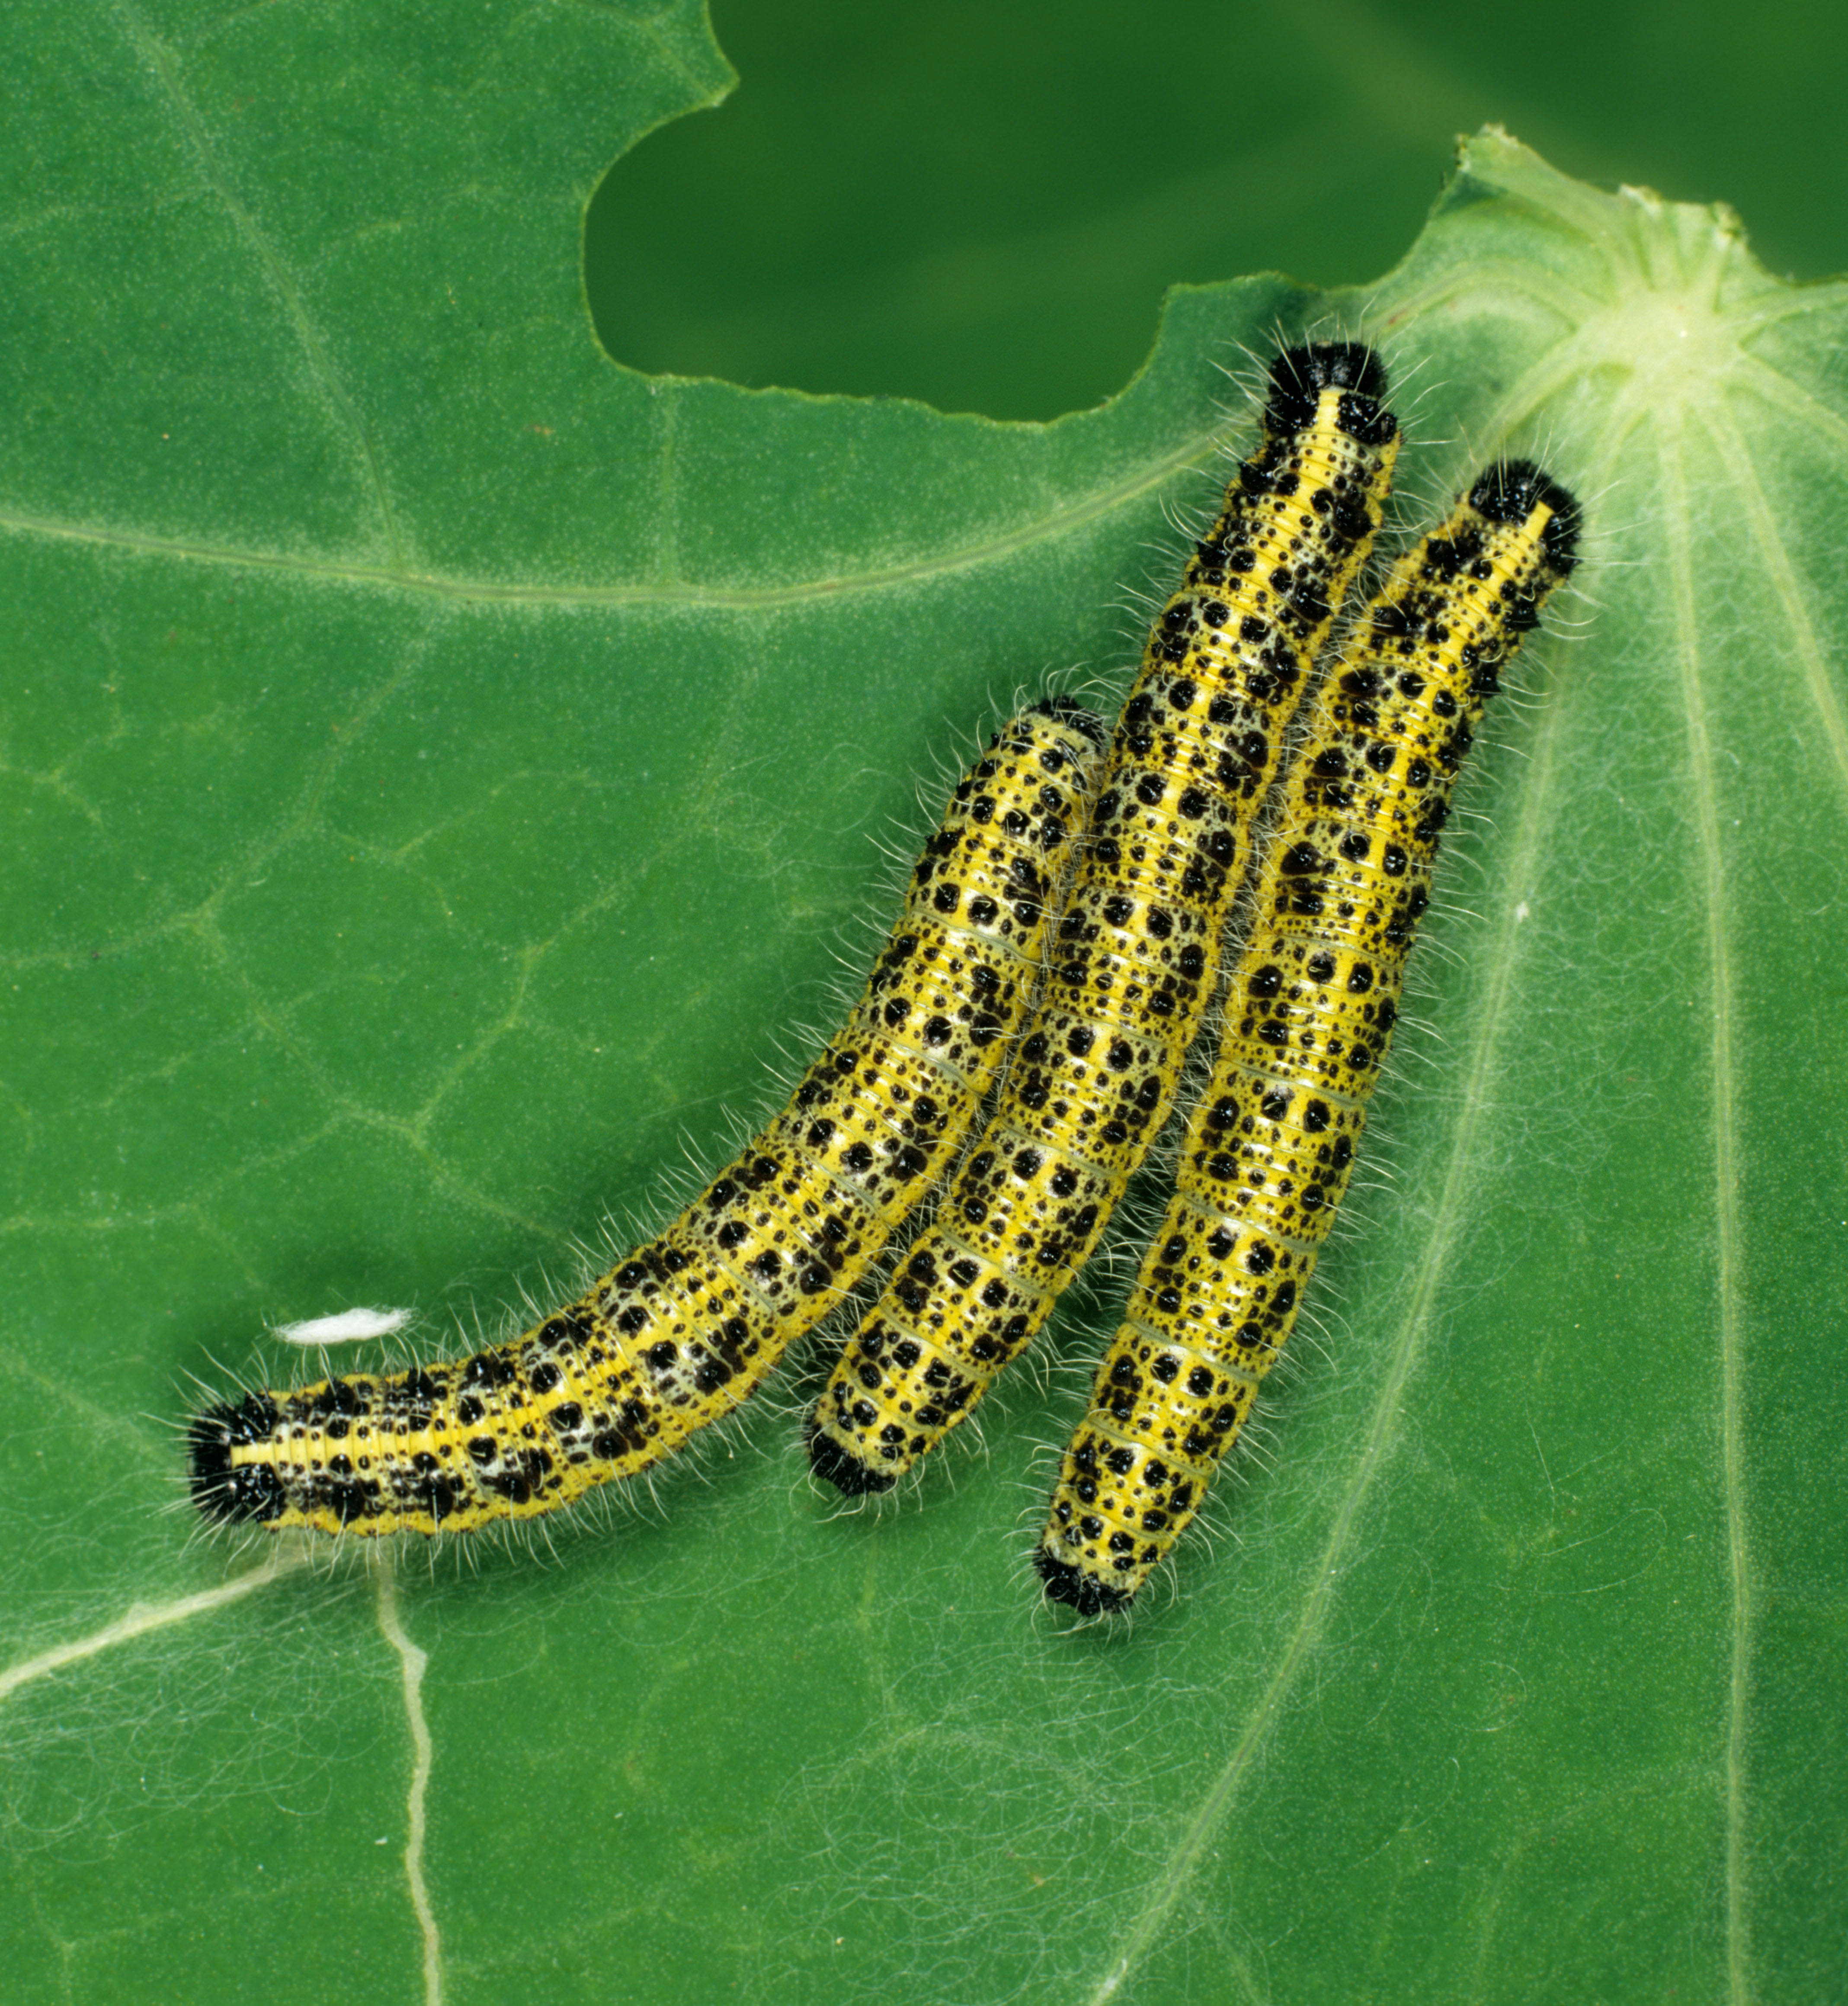 Large white butterfly caterpillars on a nasturtium leaf (Alamy/PA)